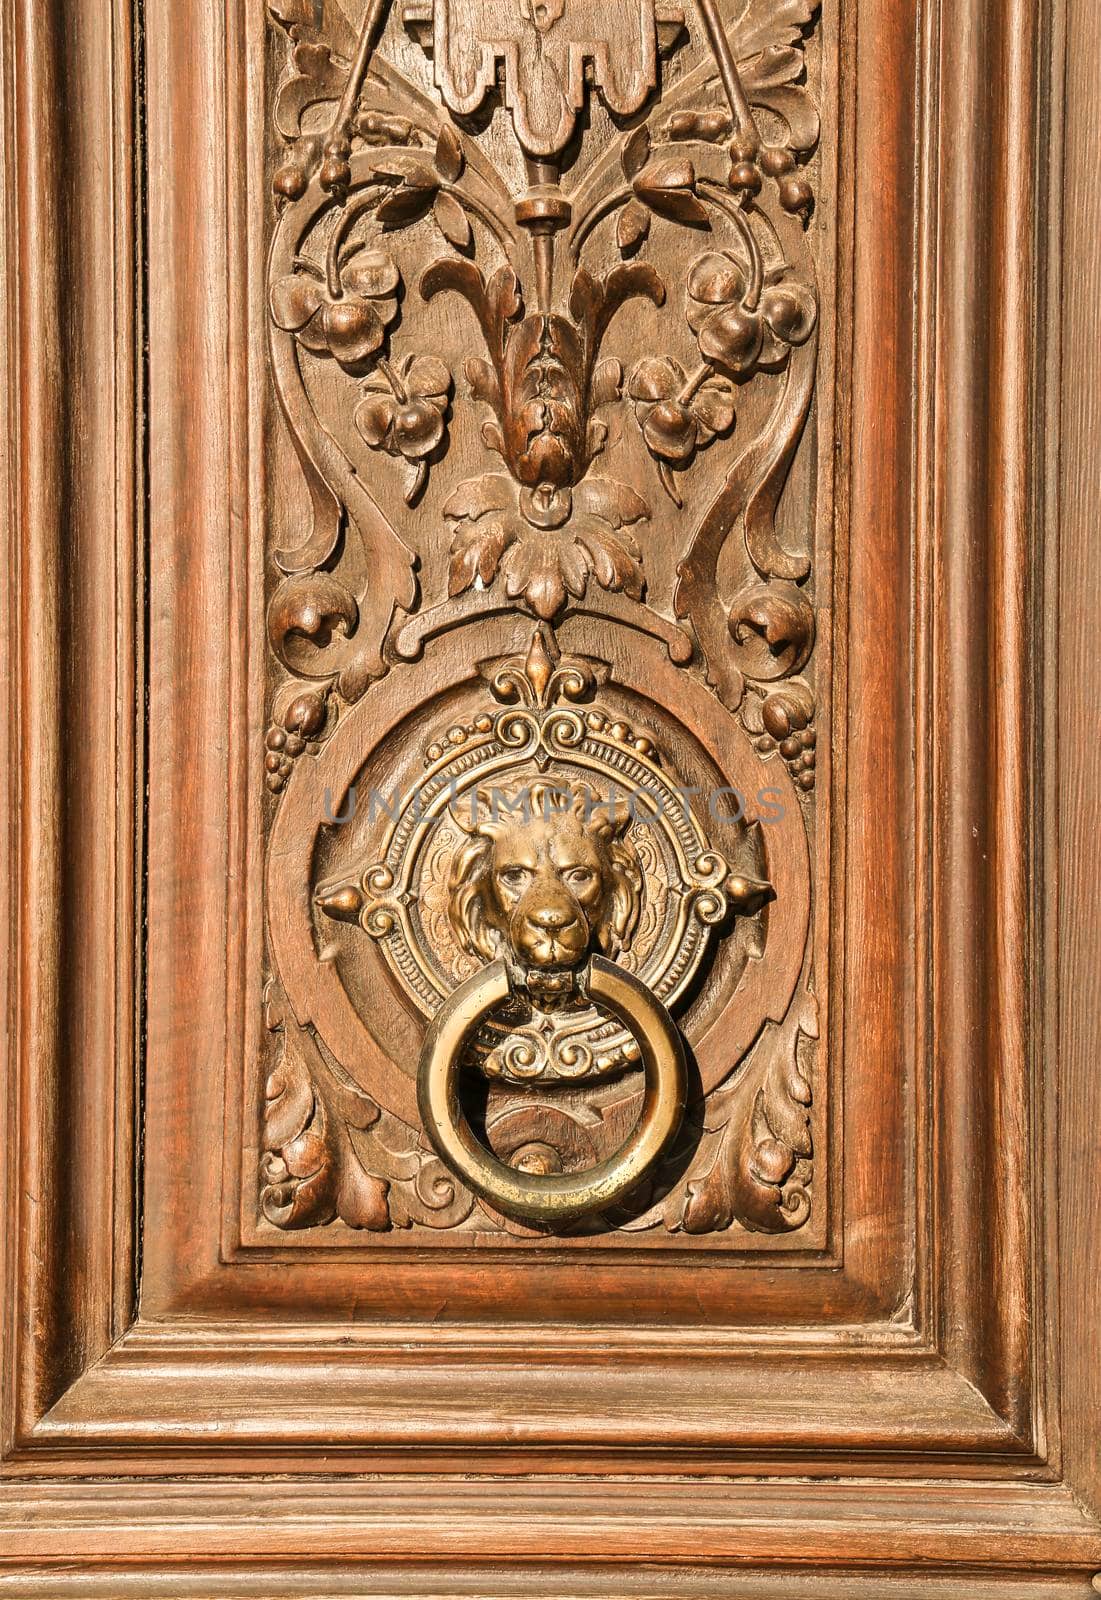 Beautiful carved wooden door and vintage lion face shaped knocker in Spain